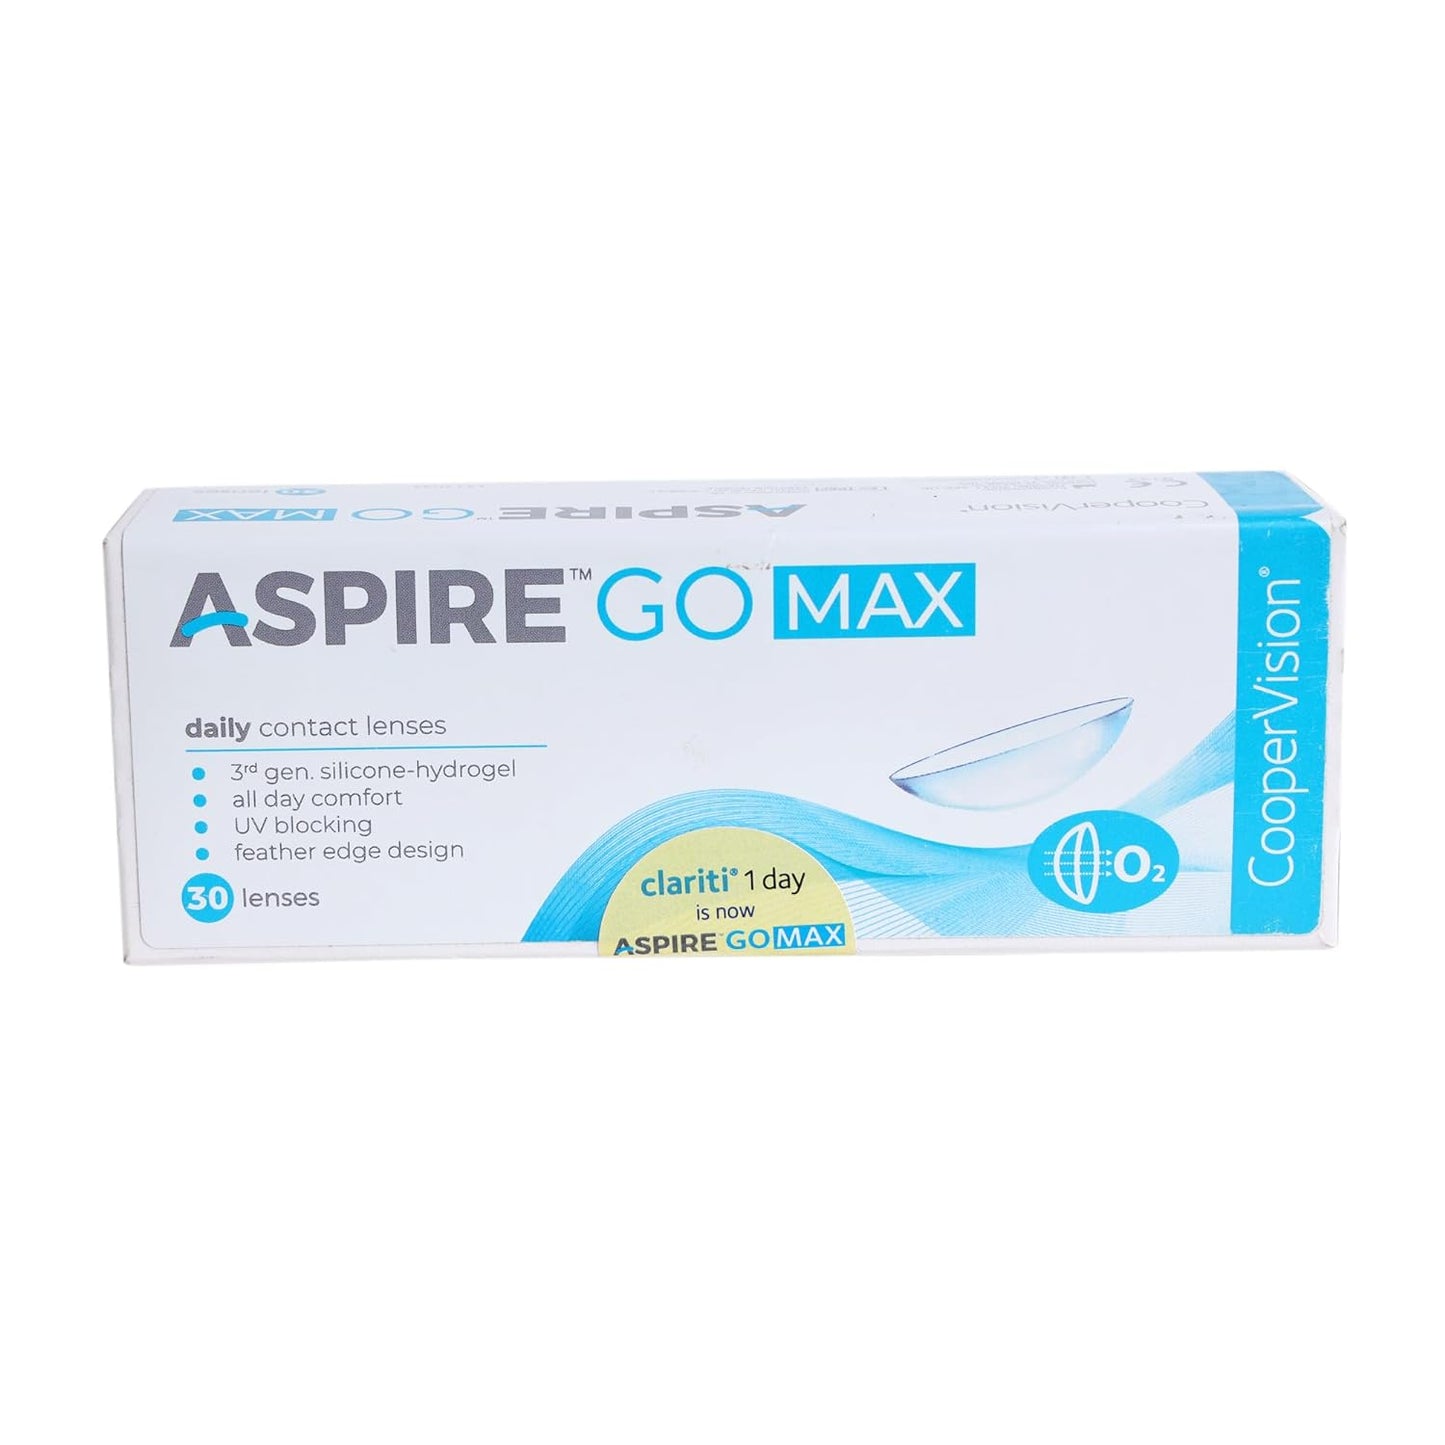 ASPIRE GO MAX DAILY DISPOSABLE  (30 Lens PACK)